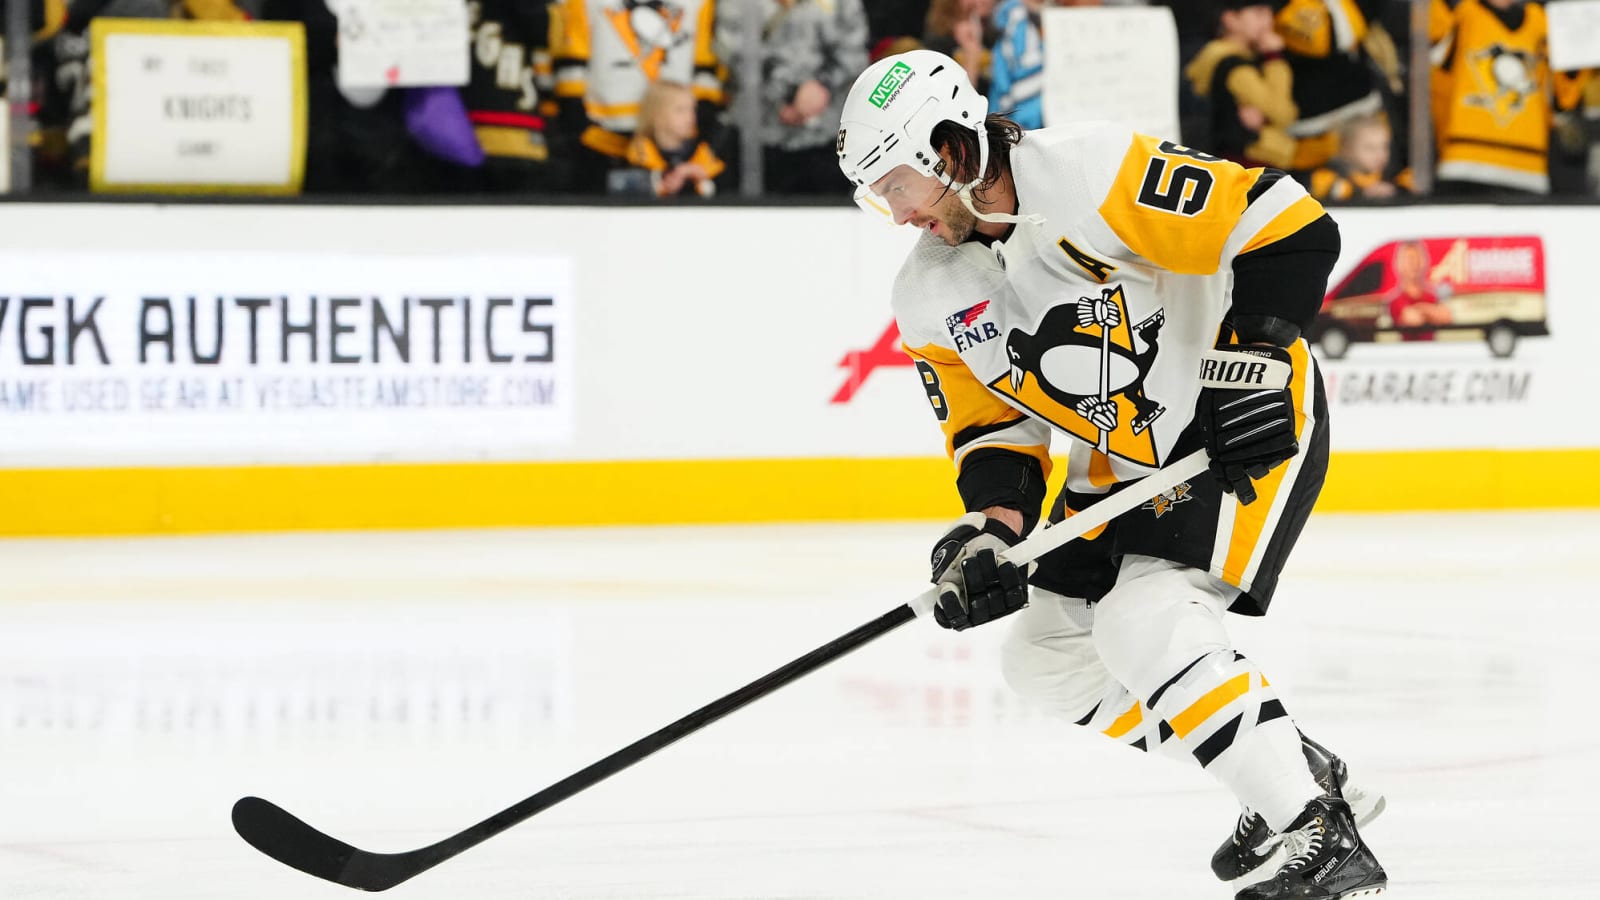 Watch: Pittsburgh Penguins score historic own goal in embarrassing sequence